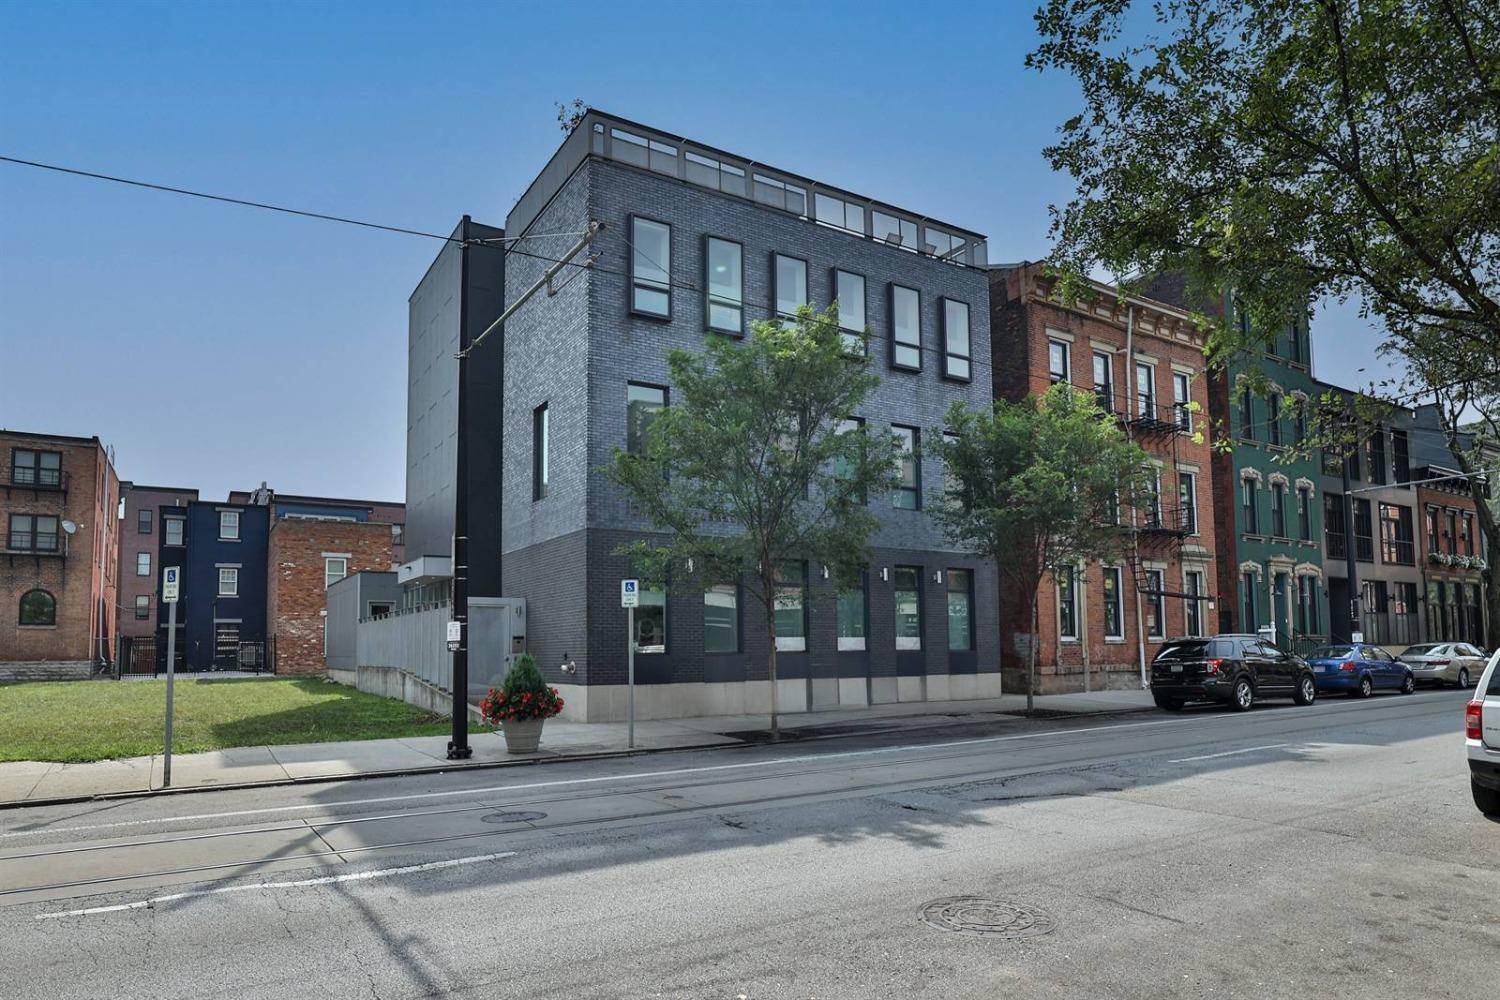 Why settle when you can have this sleek, contemporary 1400+ SF unit. The epitome of luxury living in OTR. Private entry & patio, 10' ceilings, 2 primary ensuite bedrooms. Closet space galore. Storage room. 1 garage space in 6-year-old LEED Gold and AIA award-winning 3-unit building. On the streetcar line. Walk, wheel, bike, ride to restaurants, entertainment, parks & everything OTR & downtown have to offer. Tax abated thru 2032-payable 2034. HOA allows short term rentals. Owner manages units as short-term rentals. Can be bought together with units 2 and/or 3.